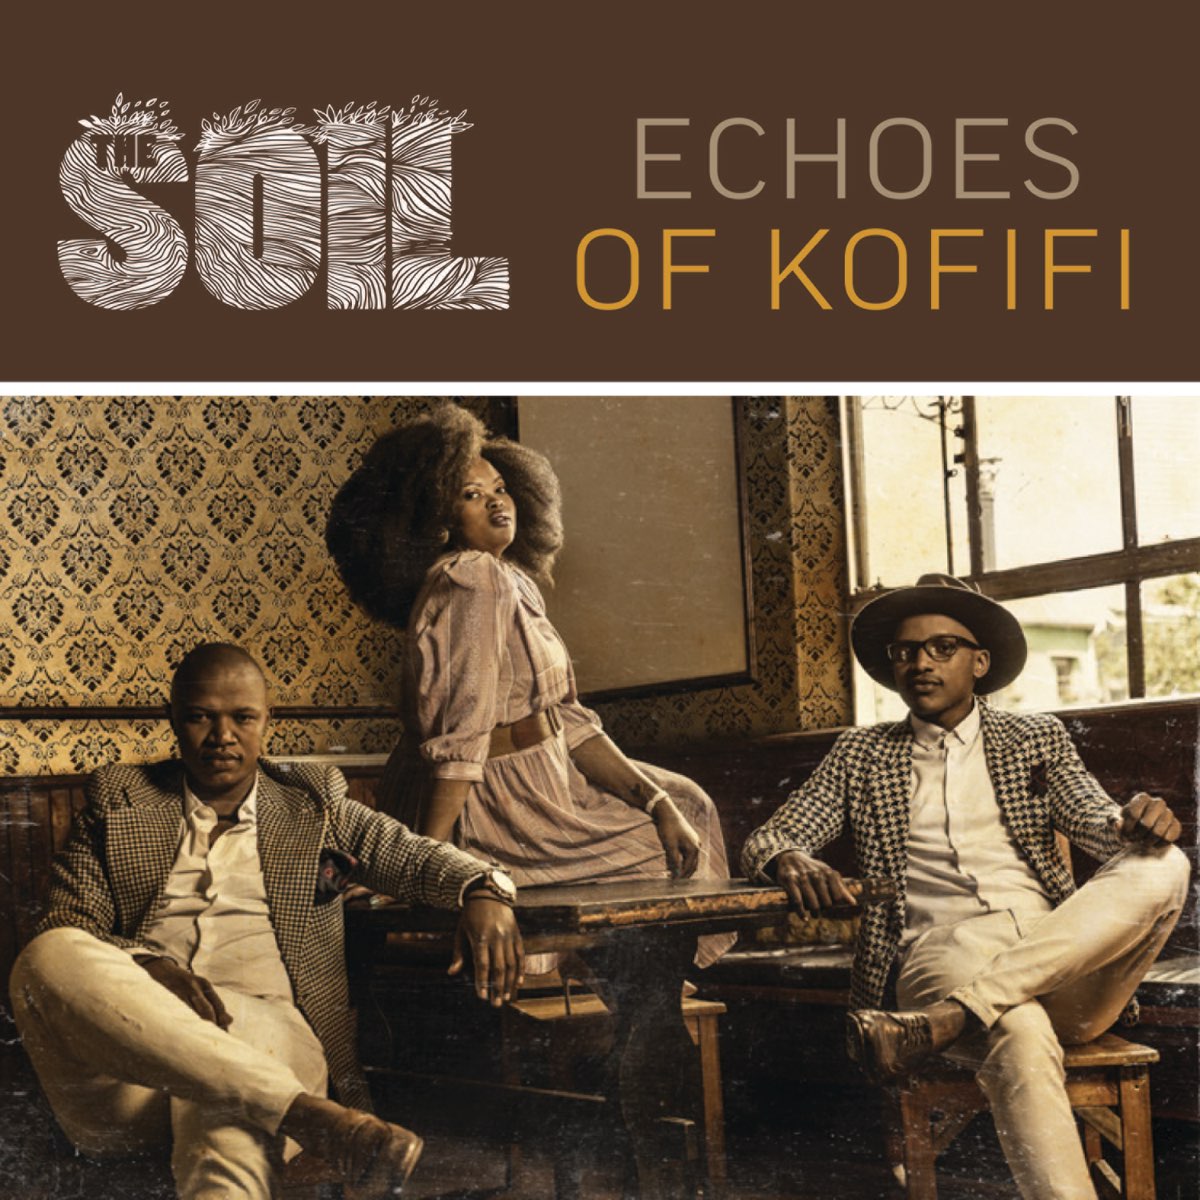 Echoes of Kofifi by The Soil on Apple Music